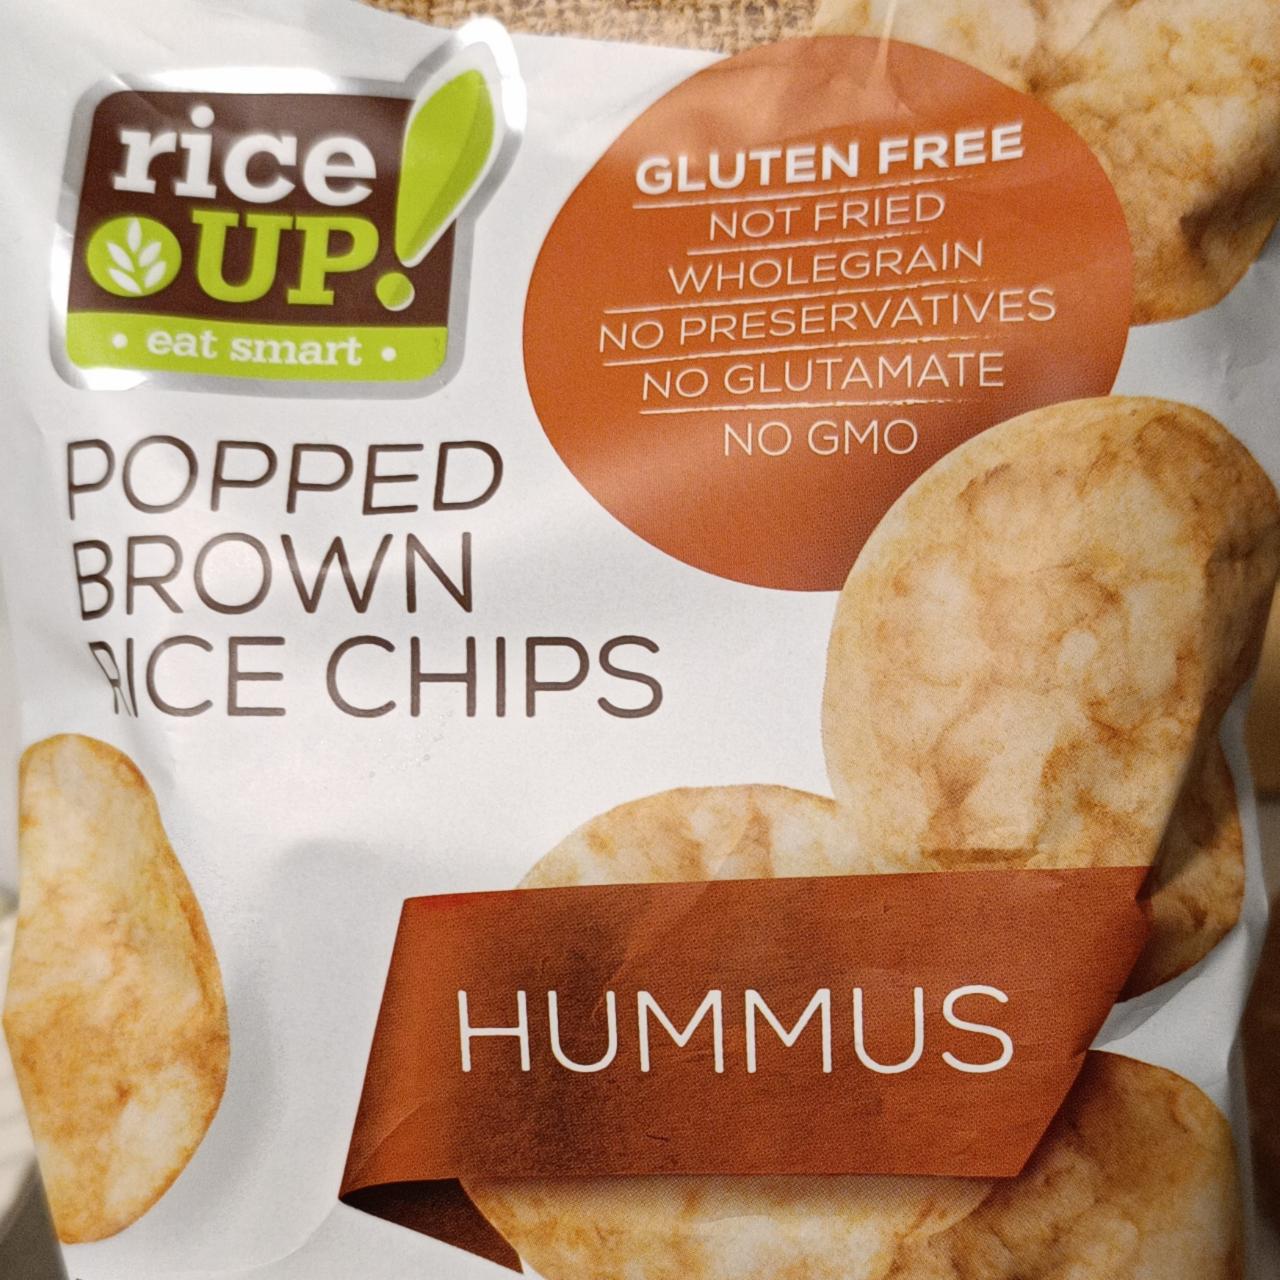 Fotografie - Popped brown rice chips HUMMUS Rice Up!